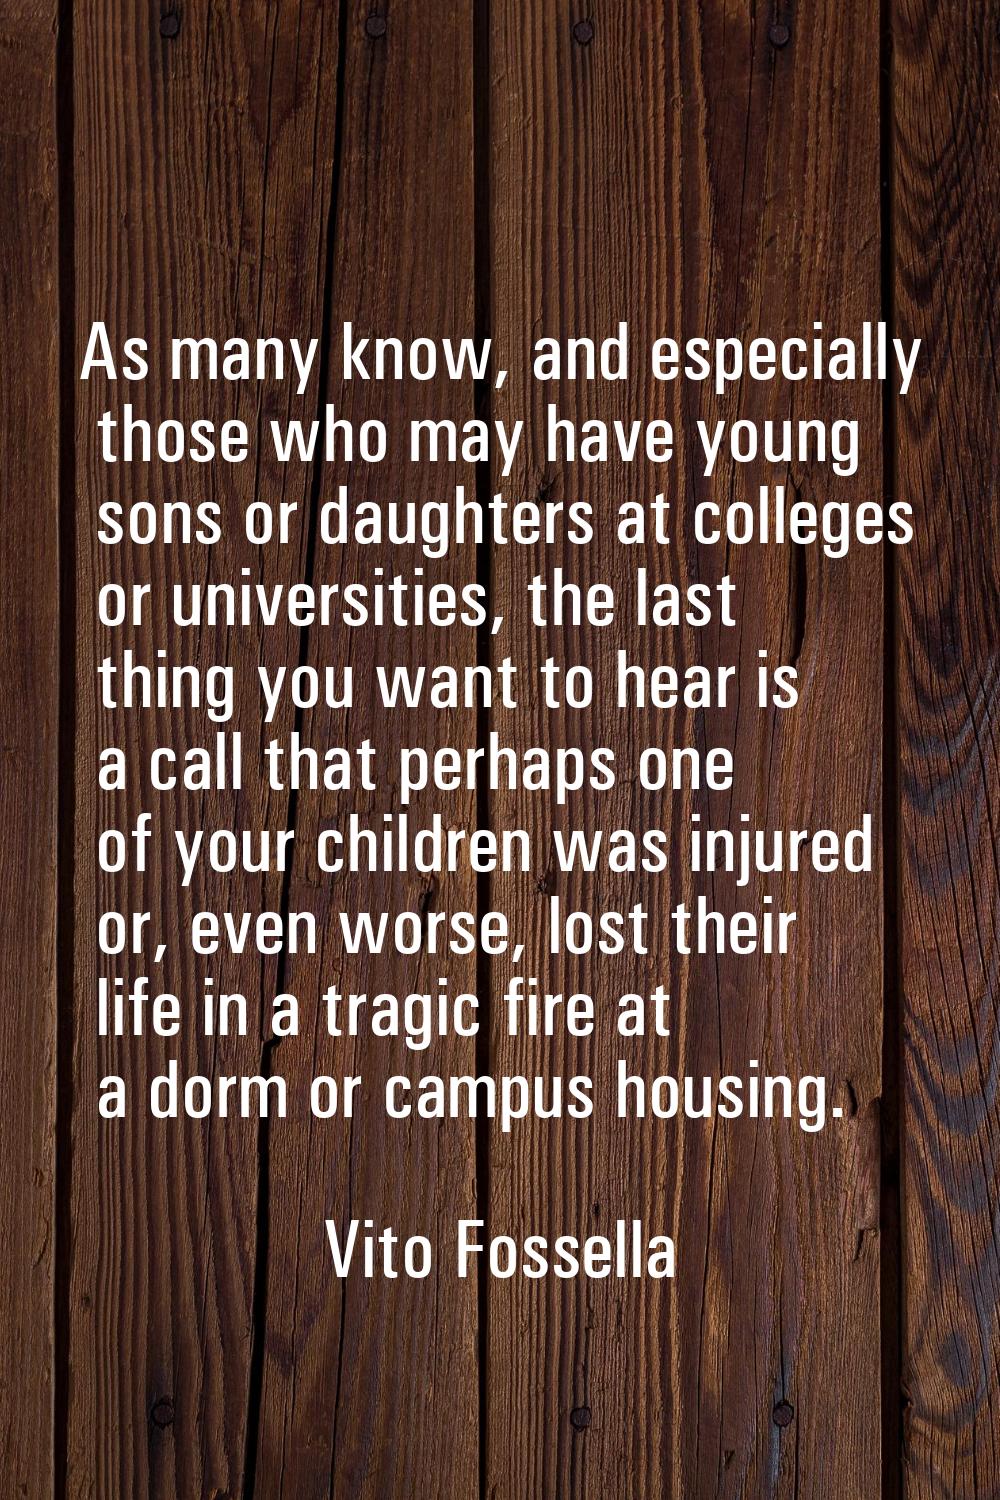 As many know, and especially those who may have young sons or daughters at colleges or universities